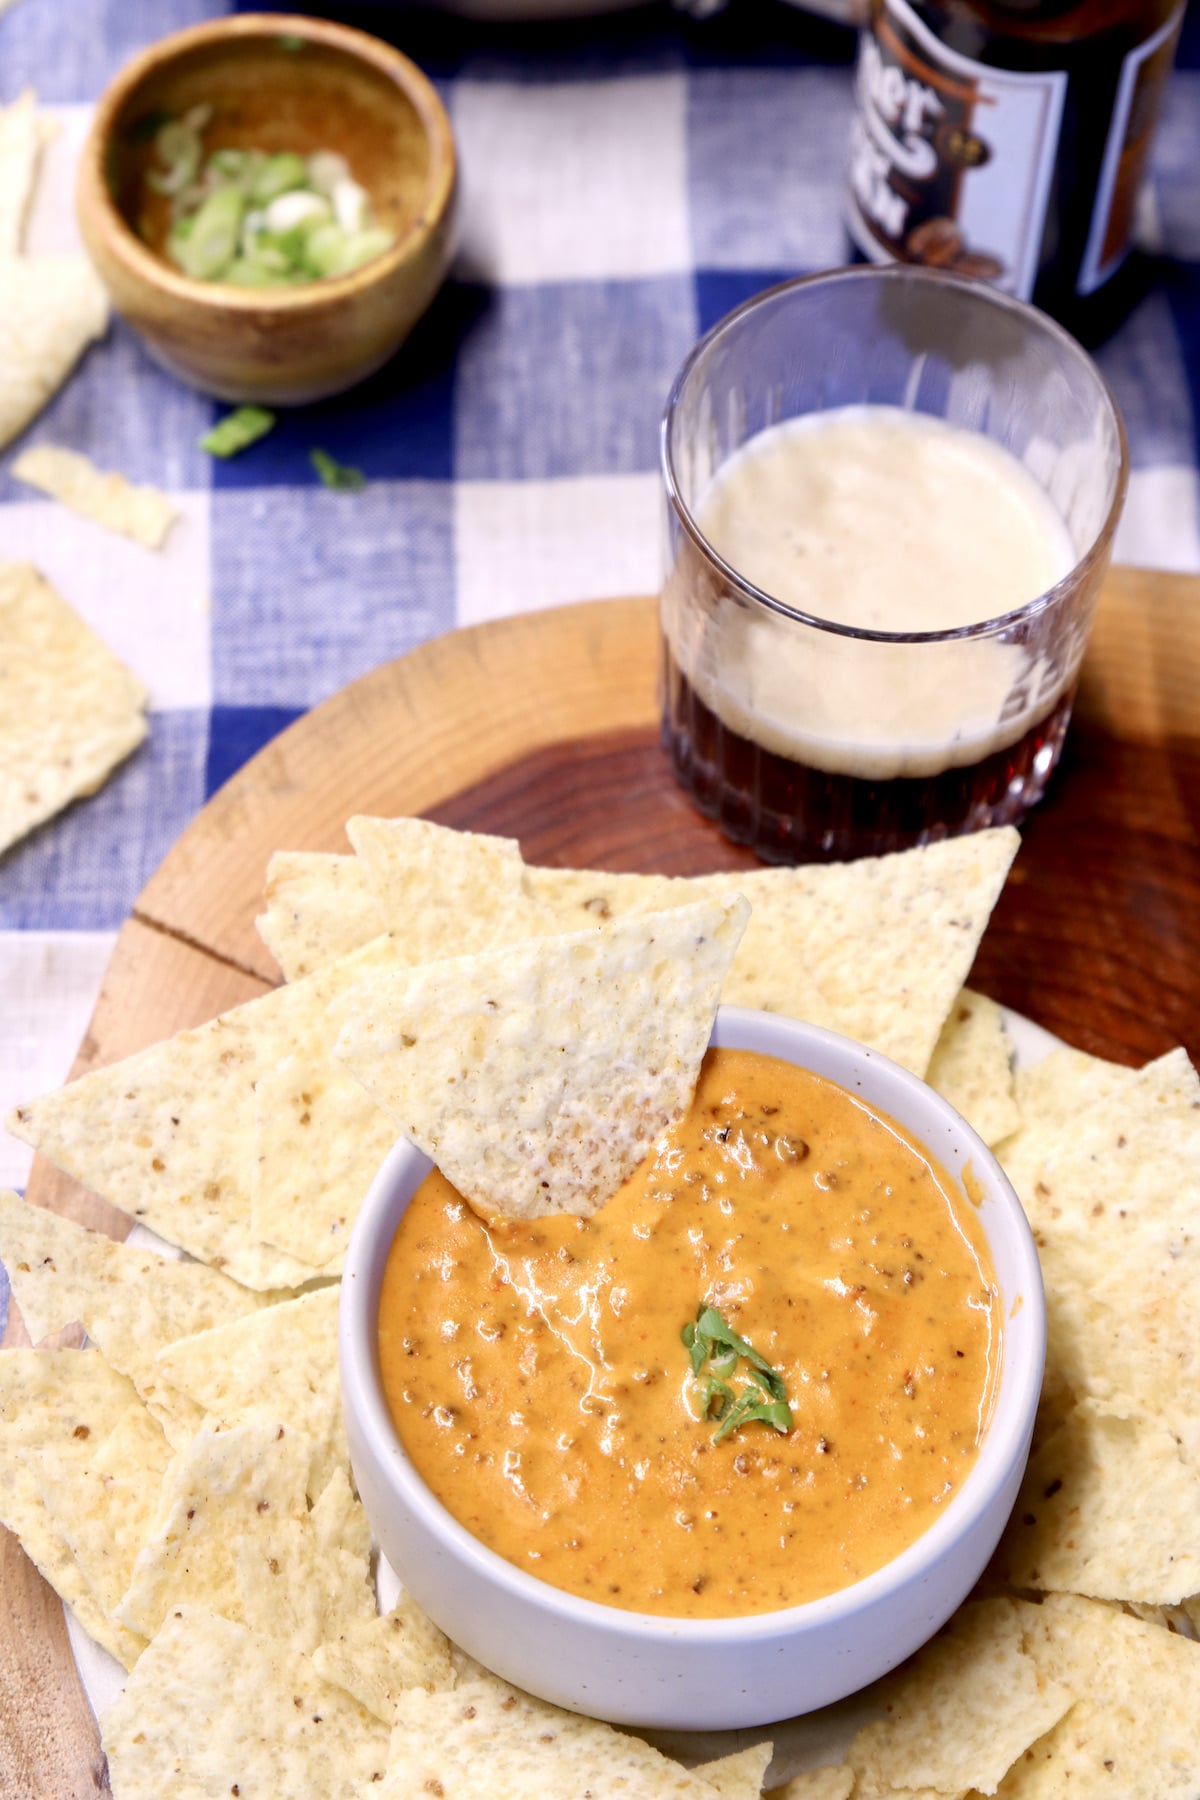 chili cheese dip in a bowl with tortilla chips and glass of beer